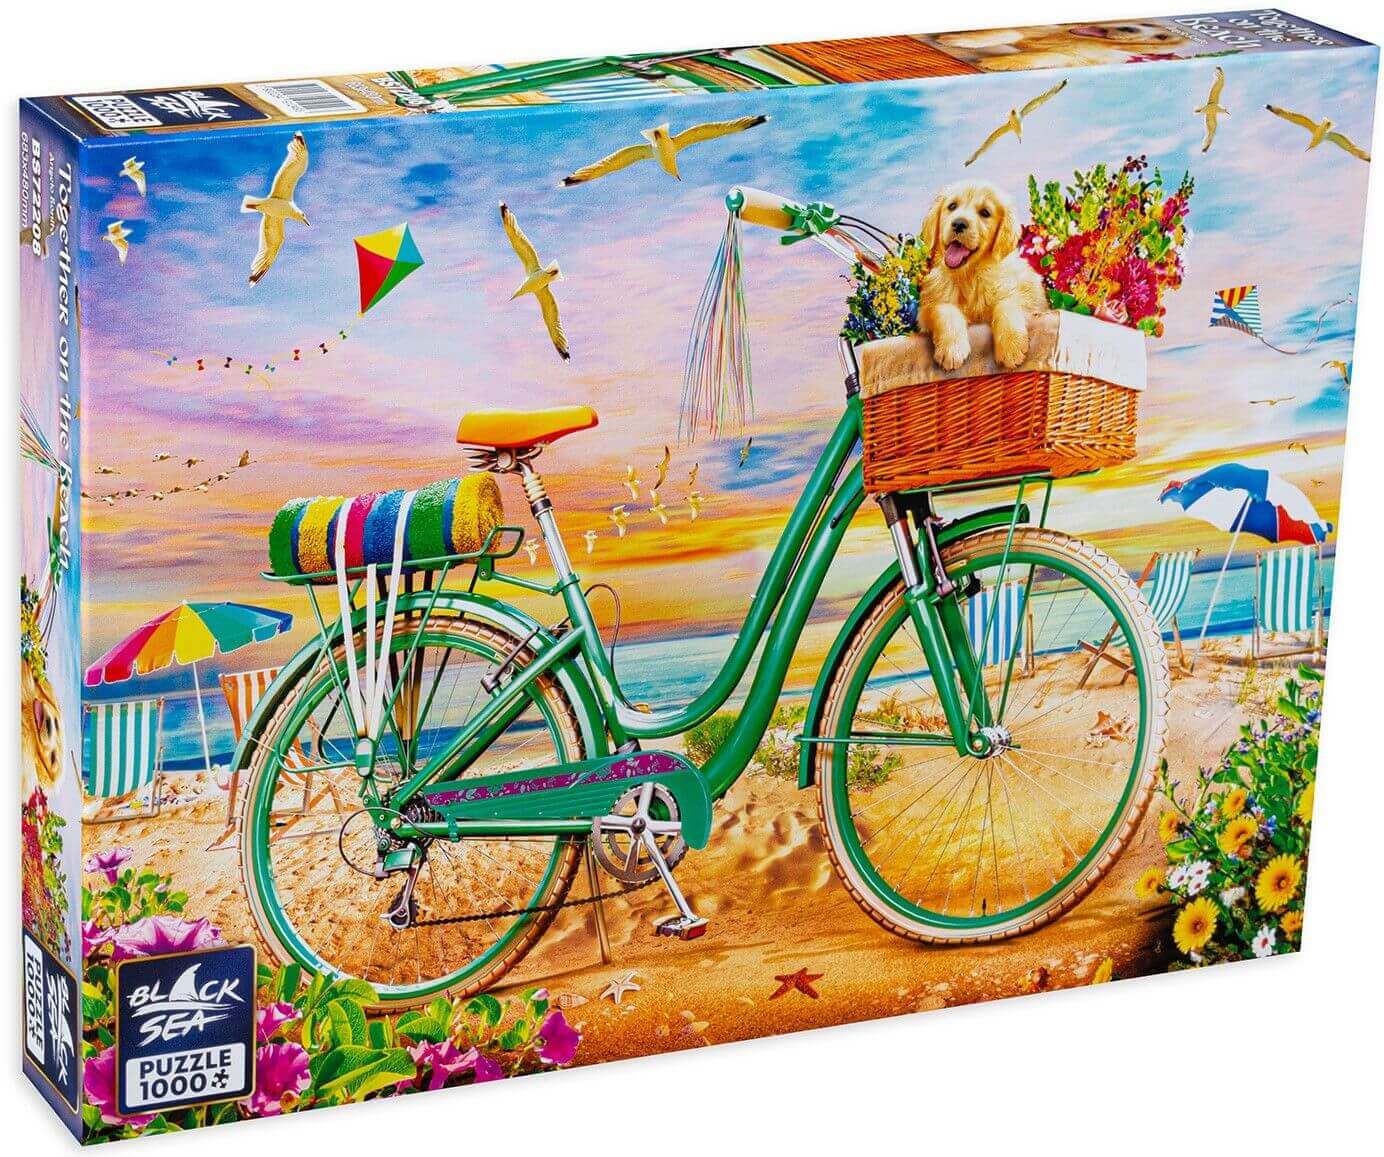 Puzzle Black Sea Premium 1000 pieces - Together on the Beach, Summer is the most anticipated season of the year. It’s time for relaxation and adventures which are enjoyed the most when shared with friends. Who says that a friend necessarily has to be a hu